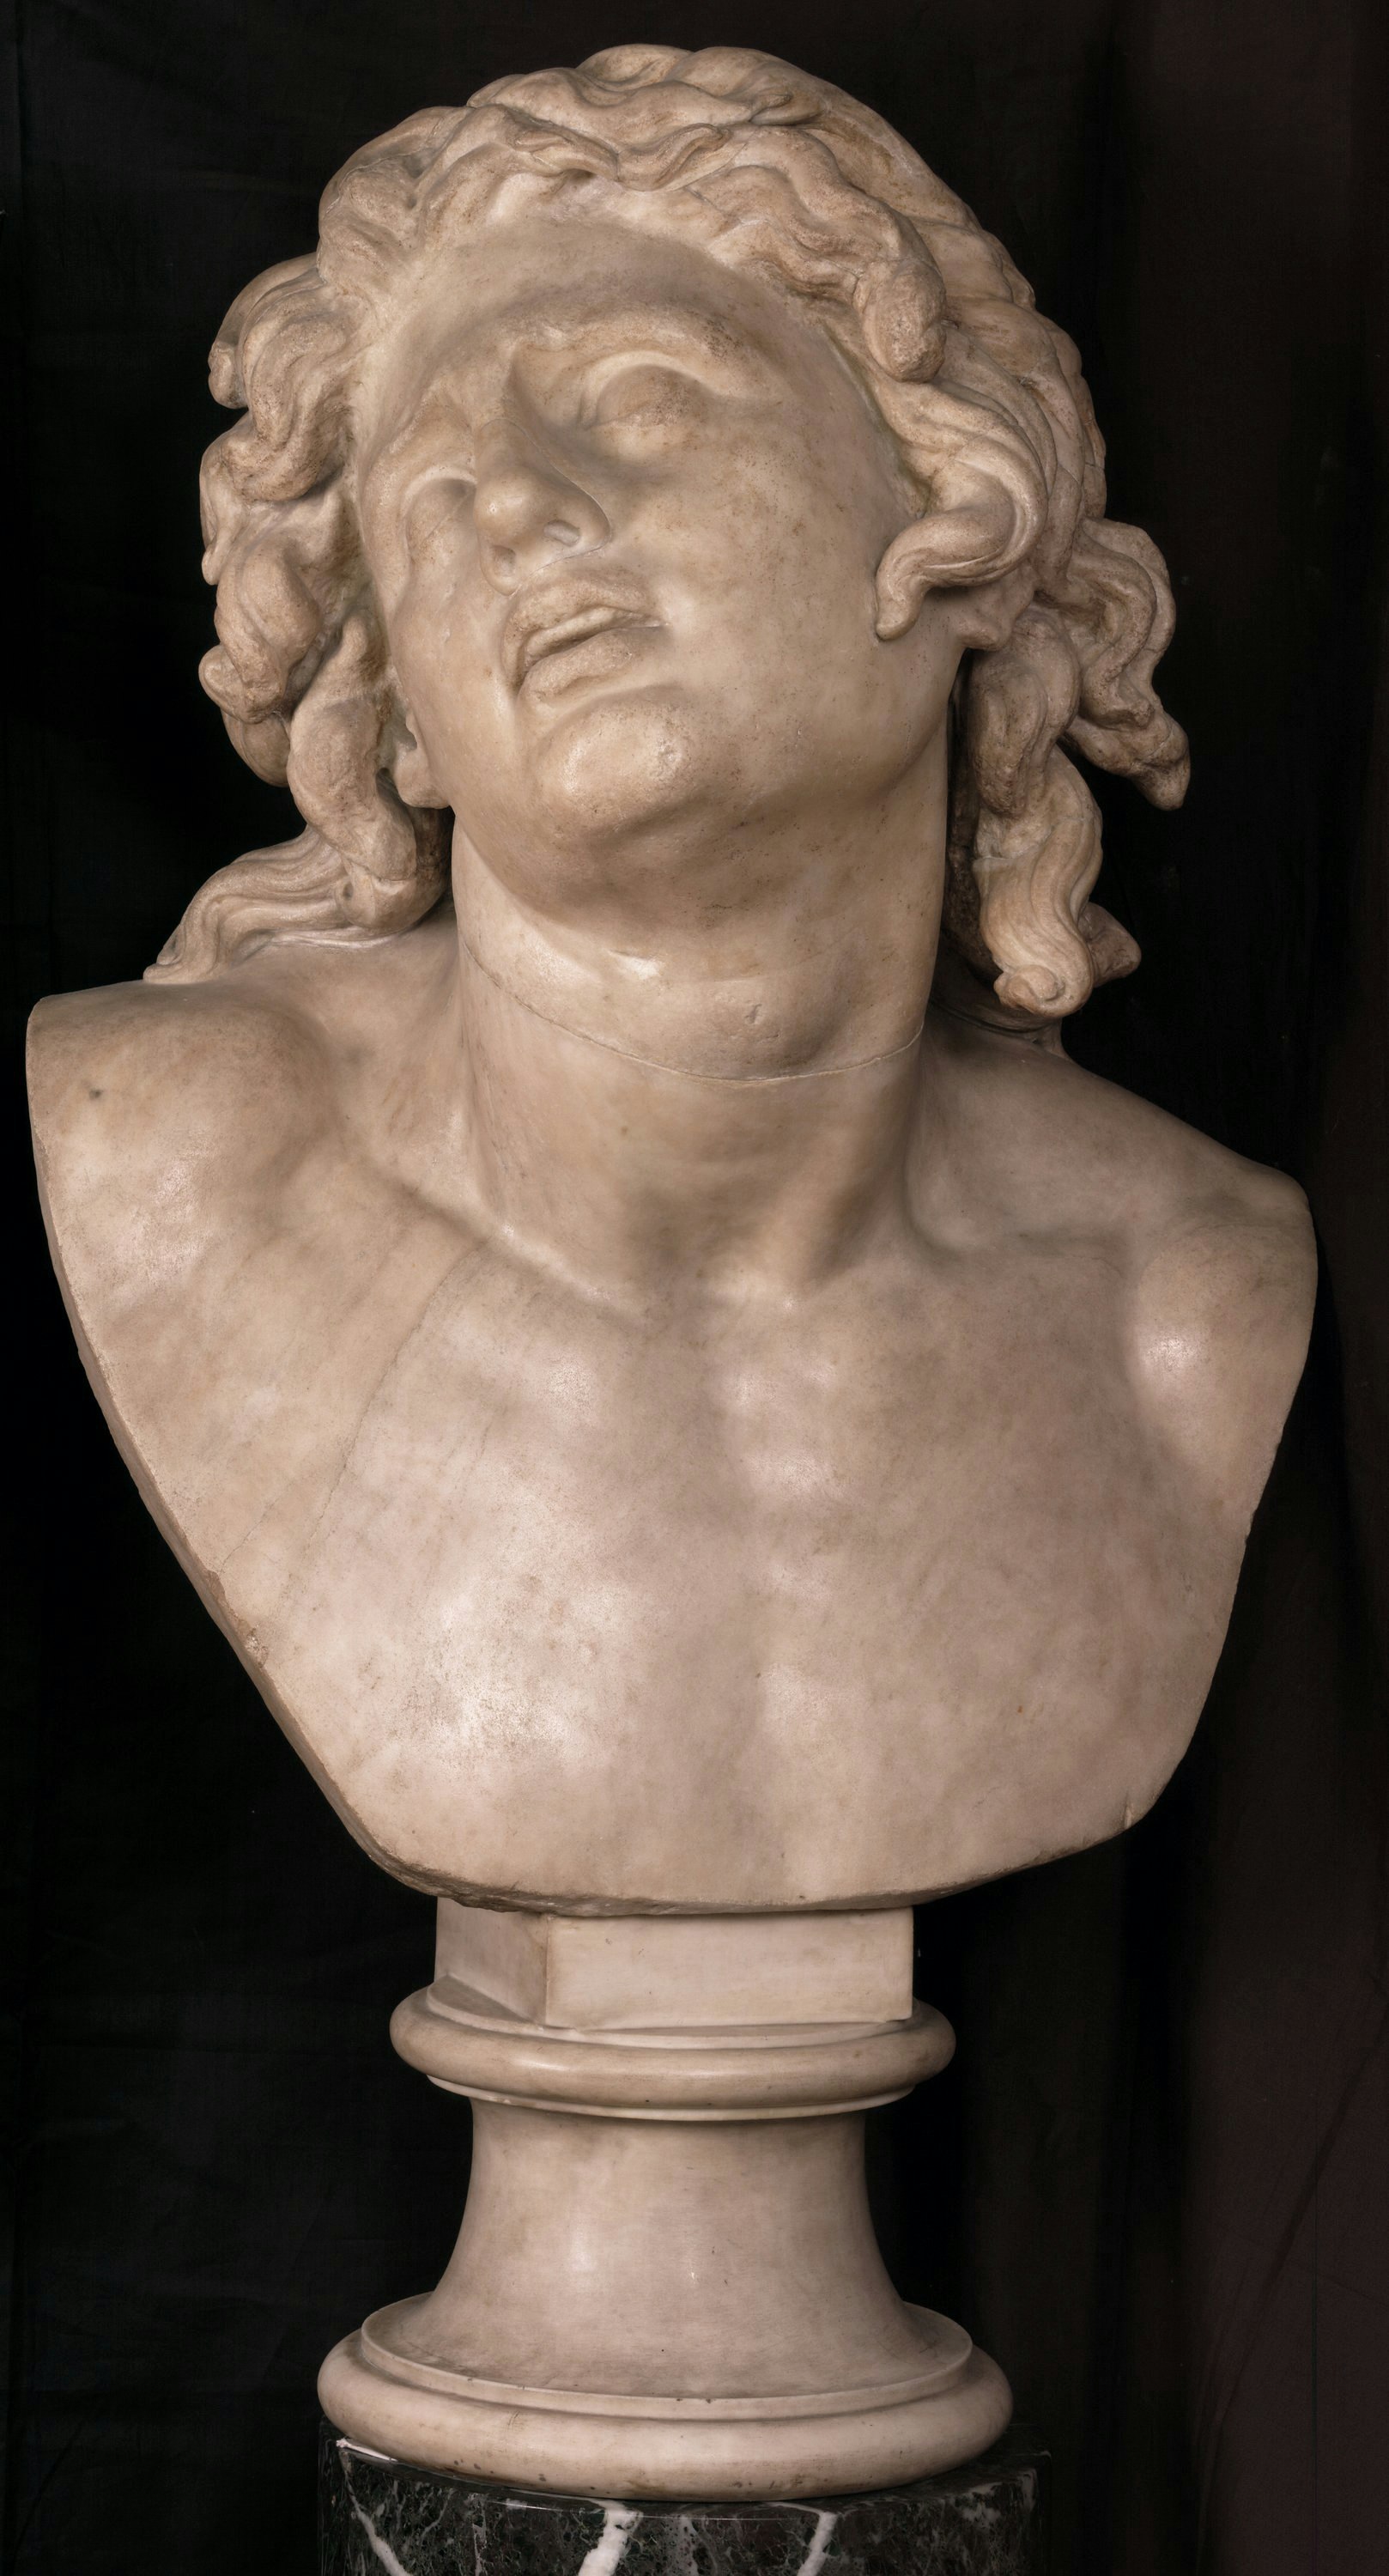 Head of the so-called Dying Alexander